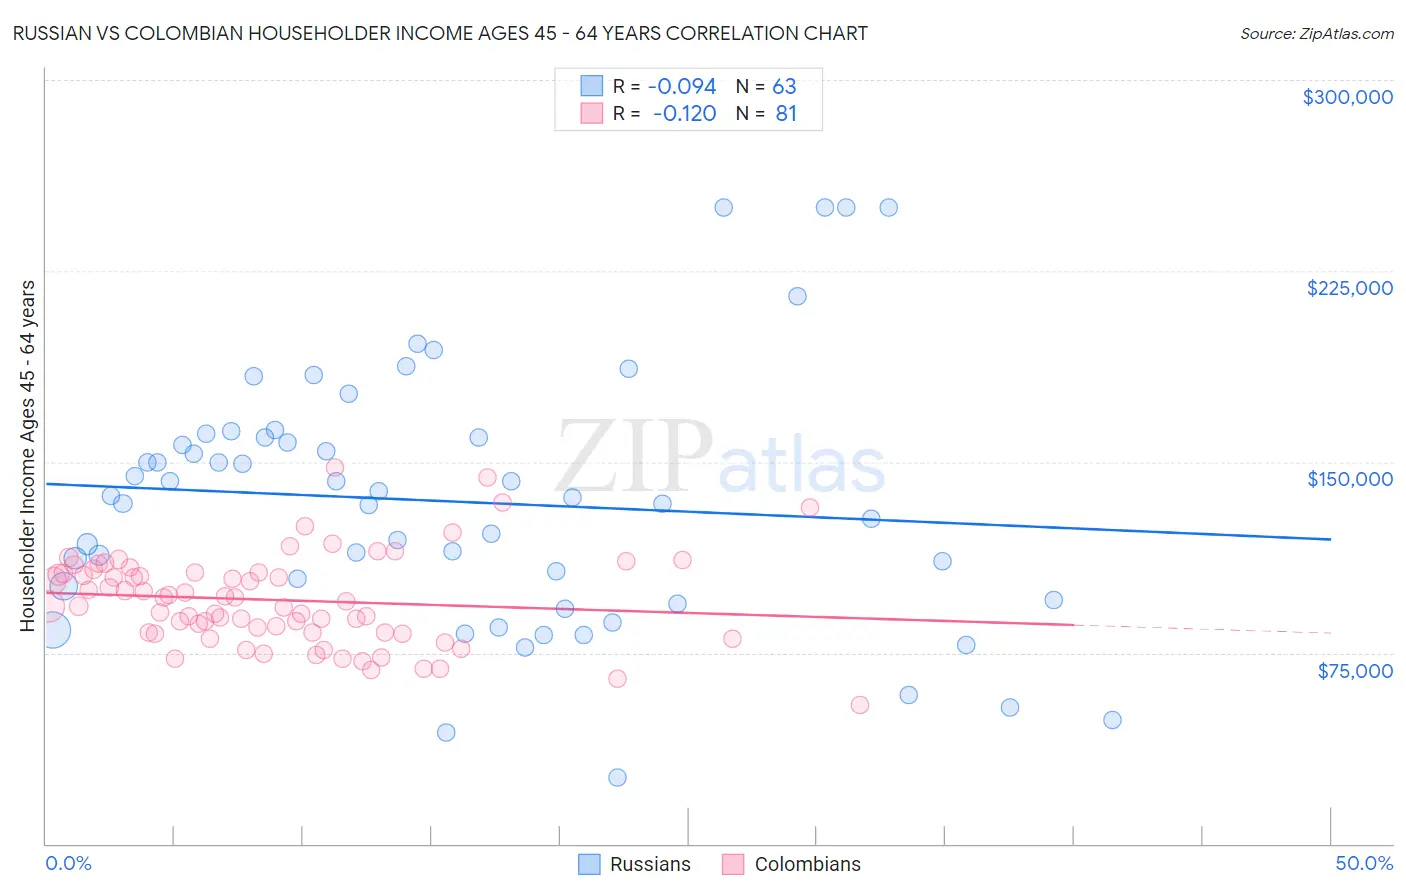 Russian vs Colombian Householder Income Ages 45 - 64 years